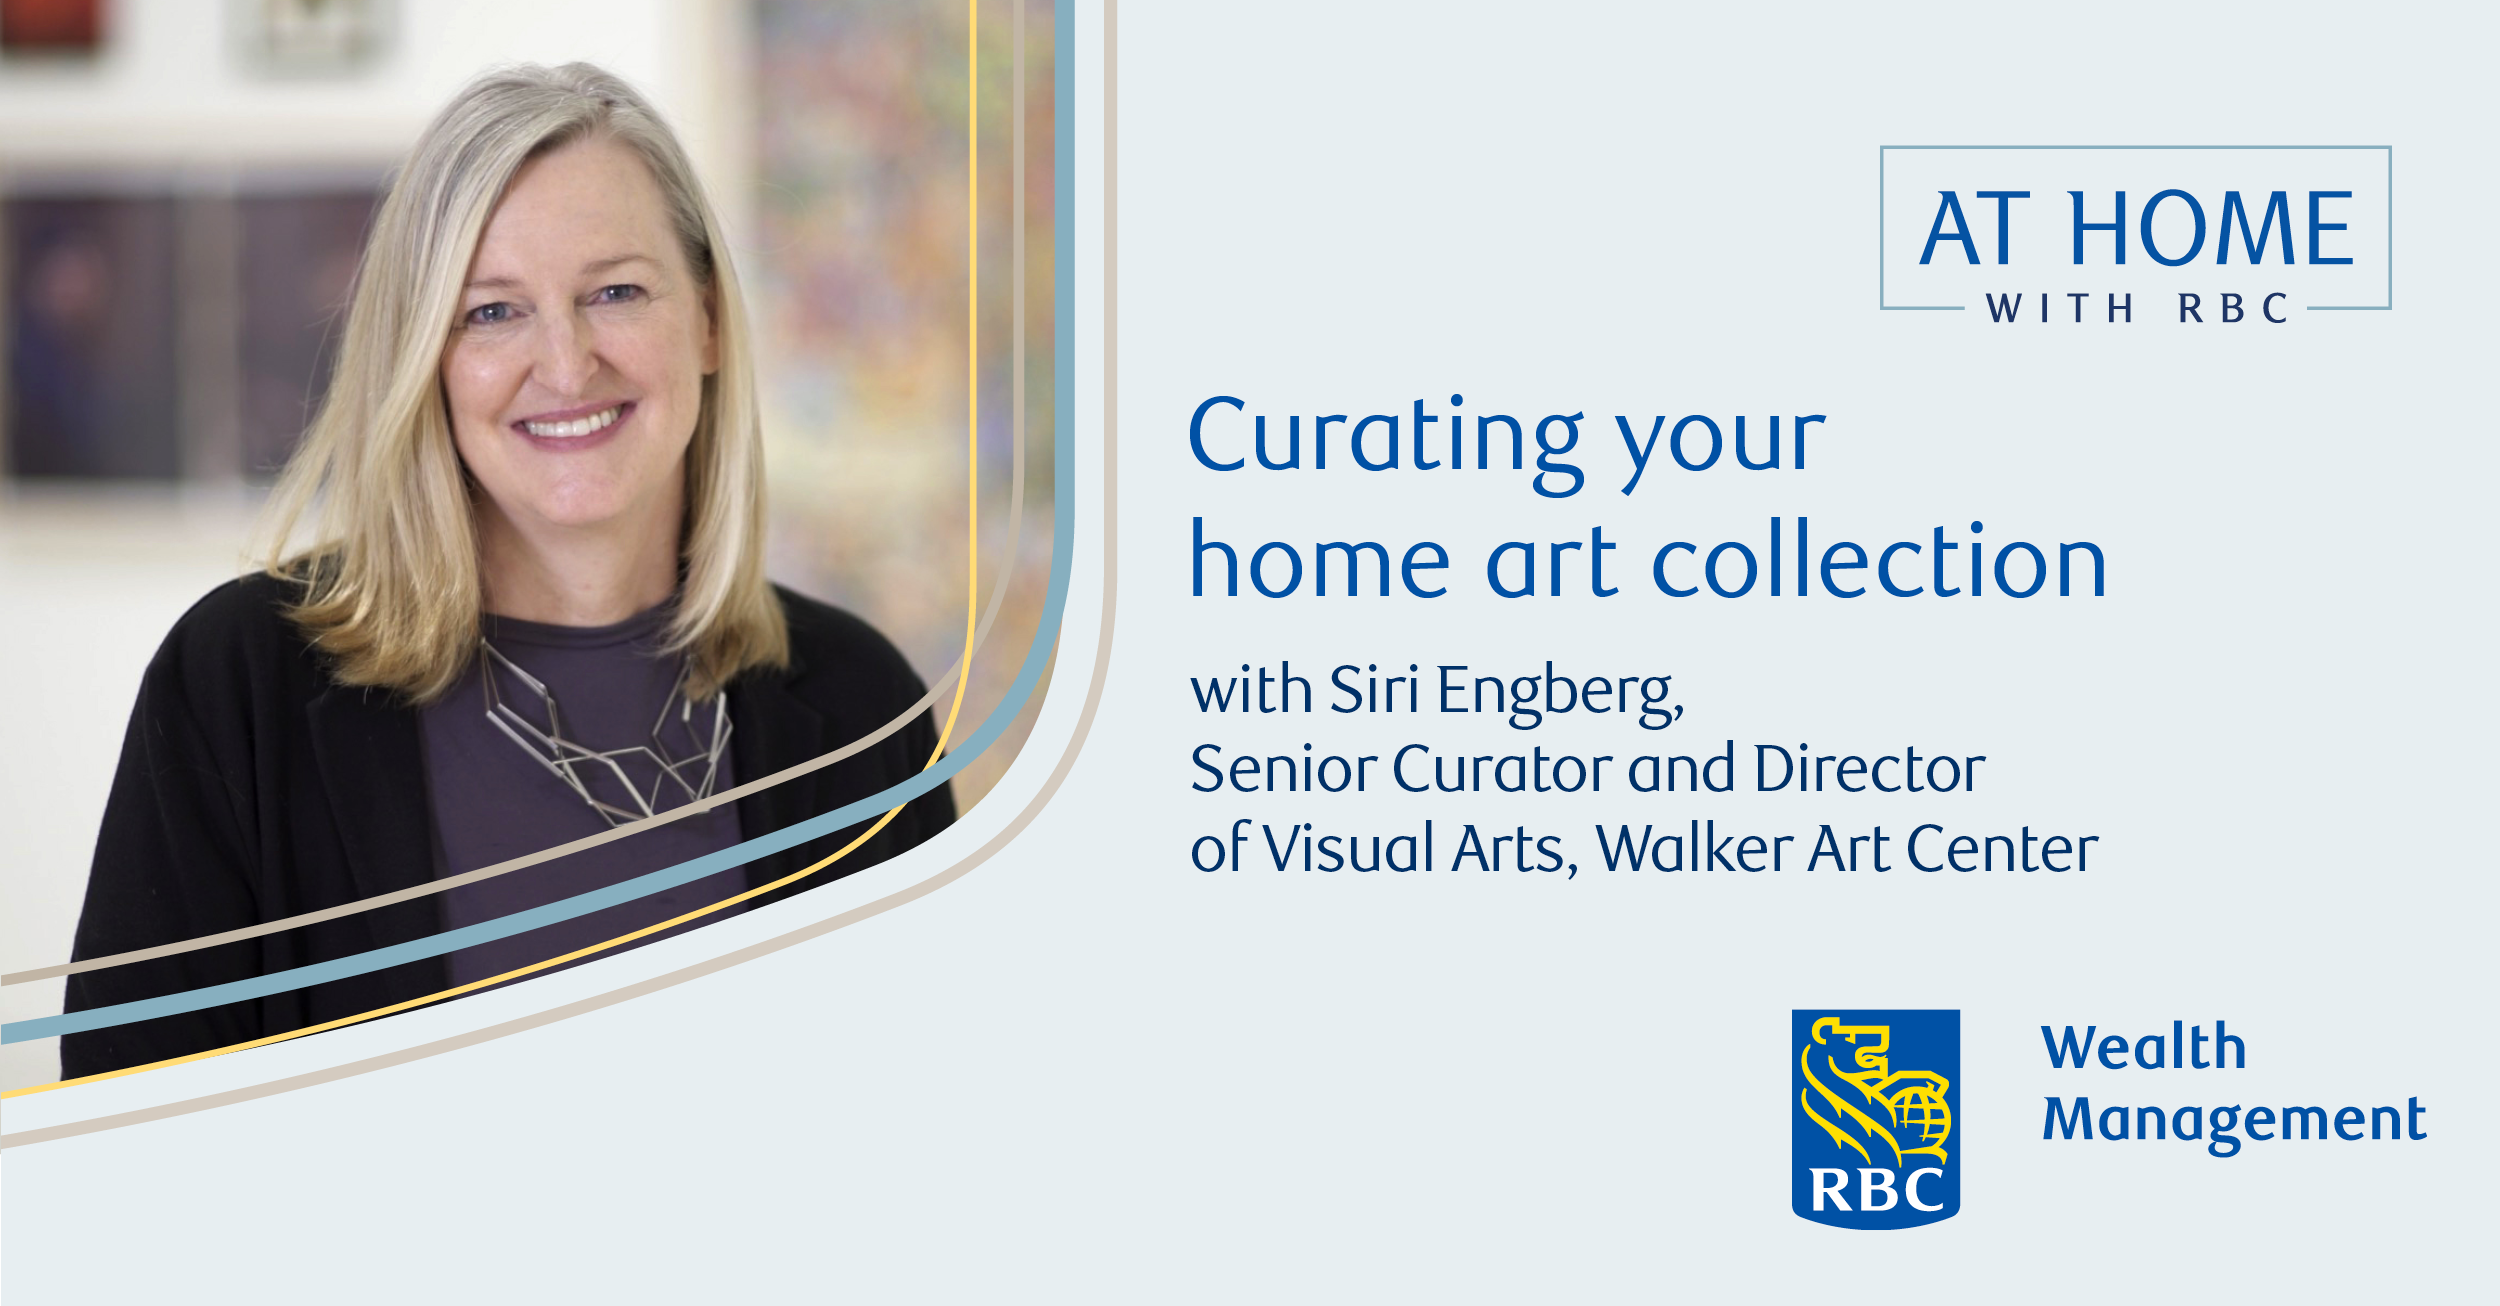 Curating your home art collection